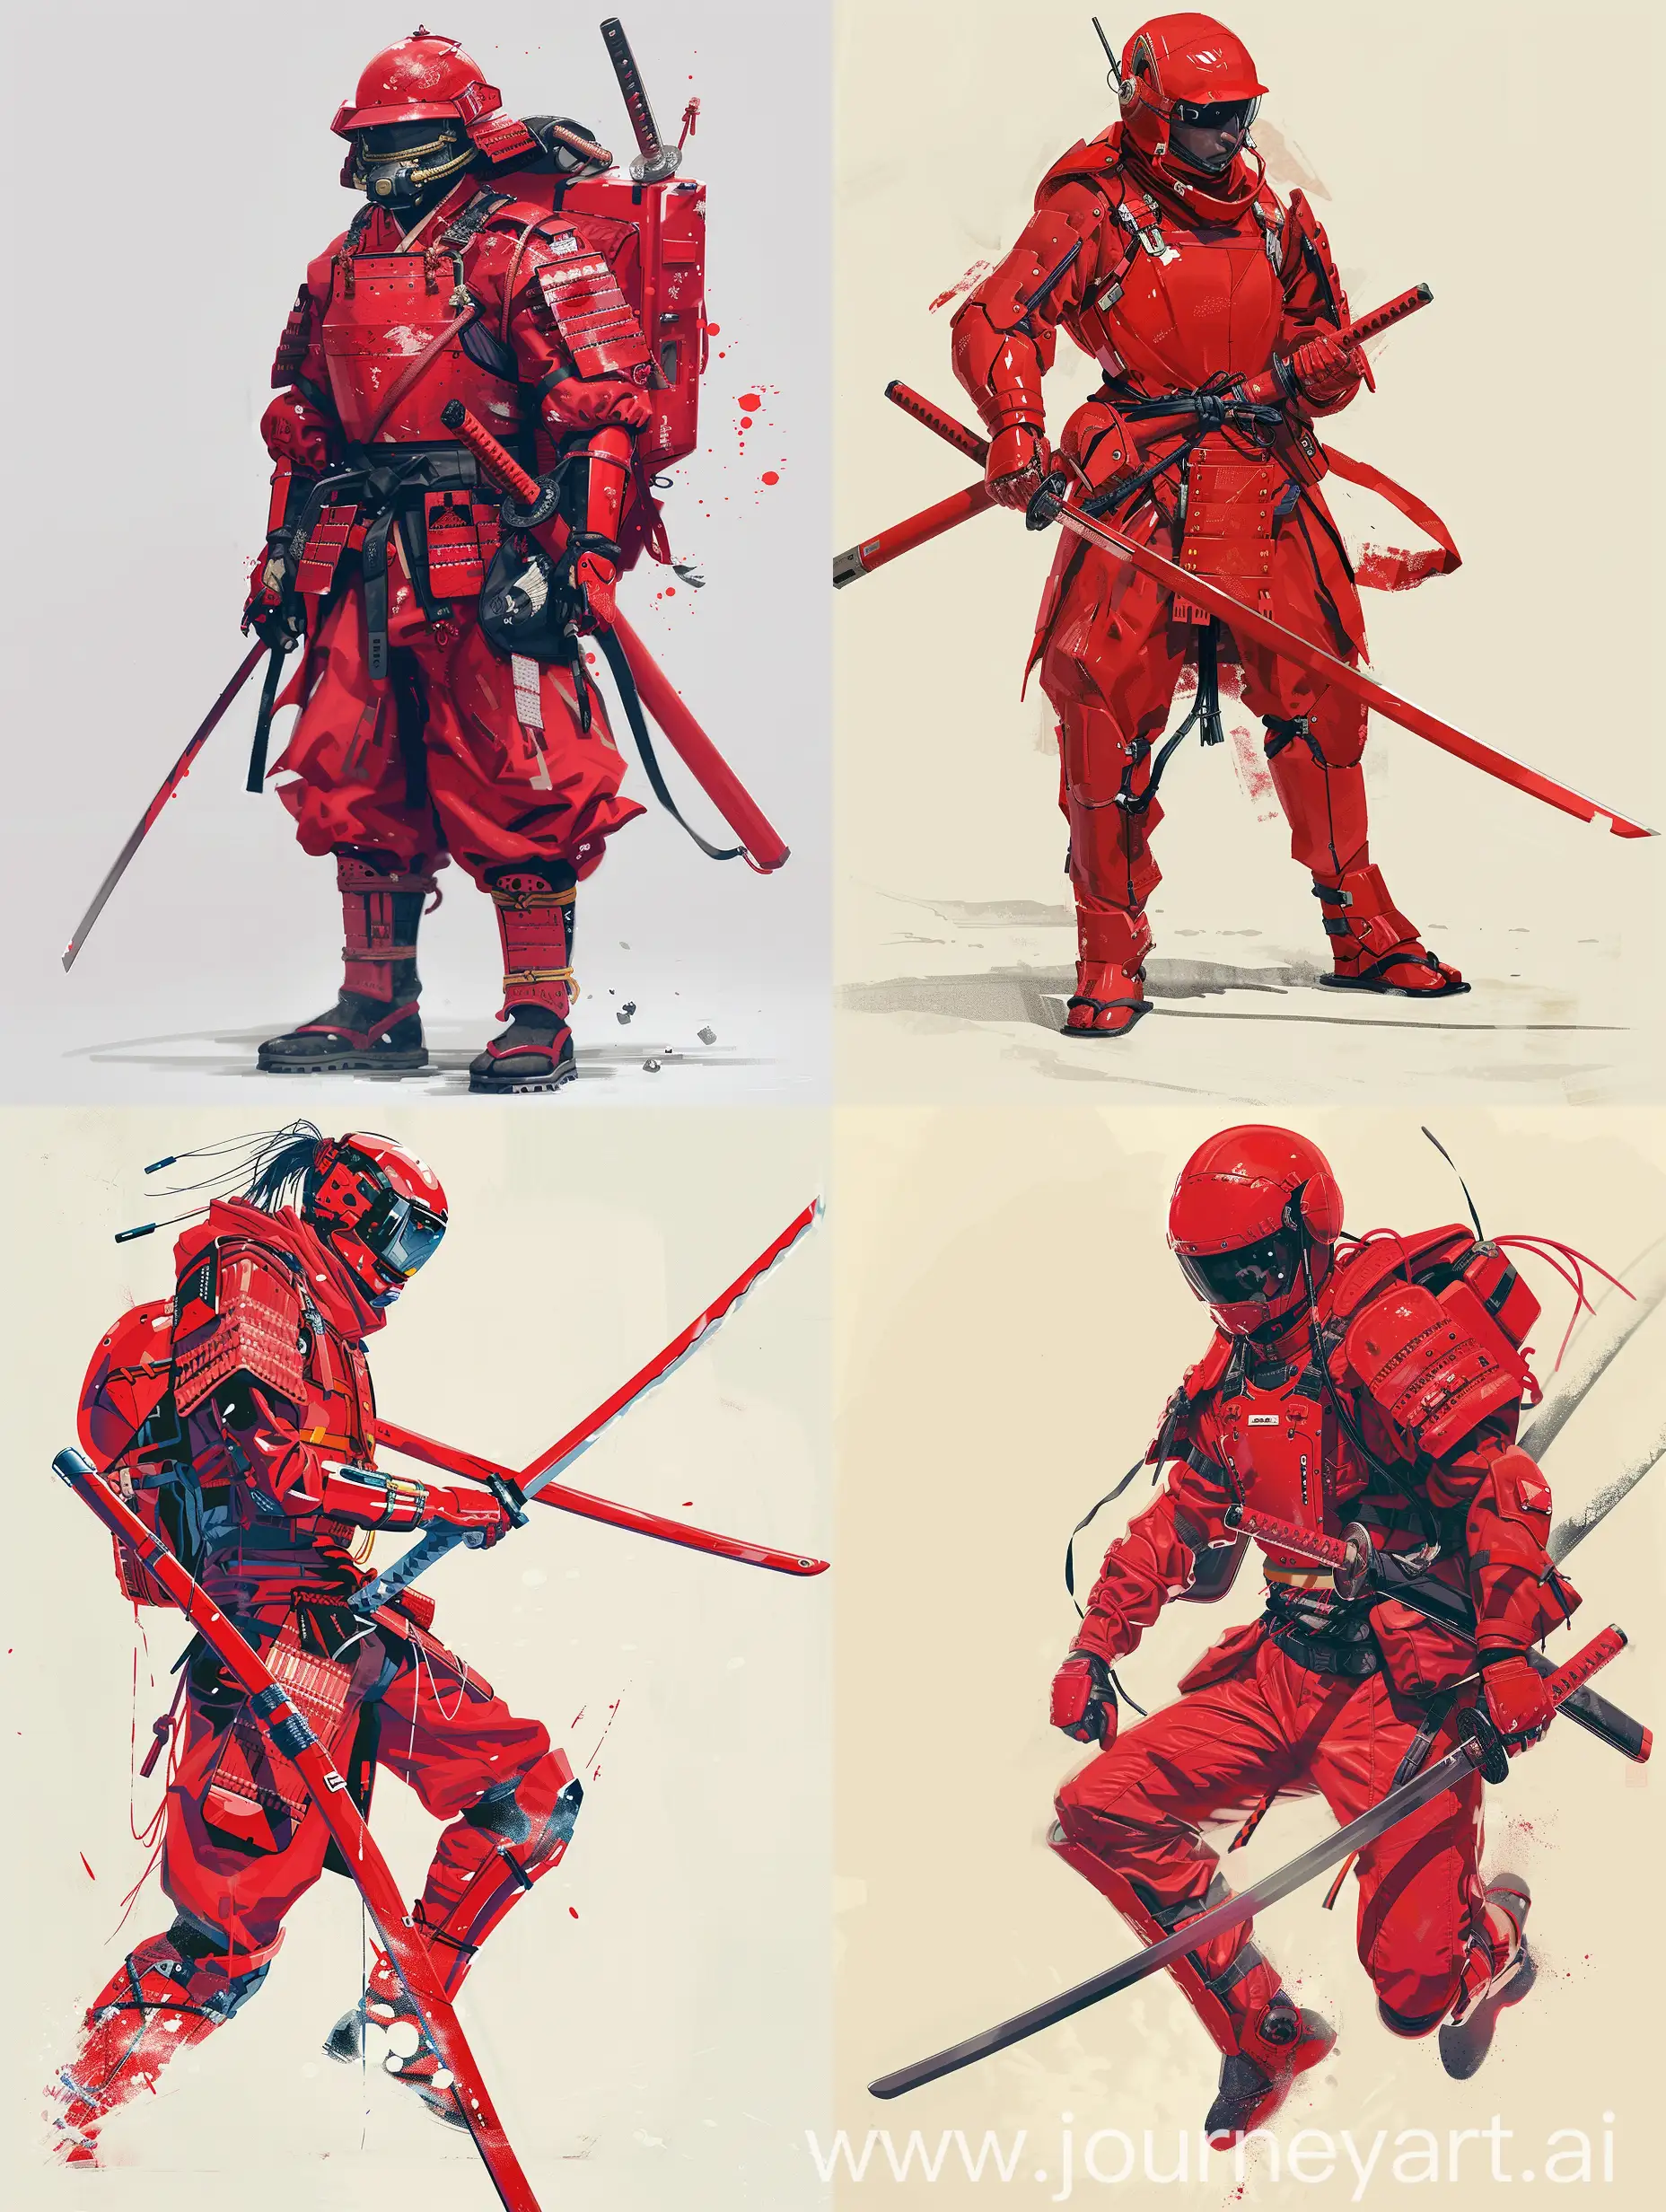 "Craft an evocative image capturing the essence of a modern-day urban samurai, drawing inspiration from the style of Kanō Hōgai's artwork. Envision the figure donned in a vibrant red samurai suit, seamlessly blending traditional armor with contemporary Japanese techwear. Picture the fusion of ancient samurai aesthetics with futuristic elements, such as a sleek flight suit design and high-tech red armor, reminiscent of cyberpunk influences. The samurai, reminiscent of a character from a sci-fi narrative, exudes a captivating aura as they wield a formidable sword, embodying a harmonious convergence of tradition and innovation in a mesmerizing tableau of modern-day samurai elegance."